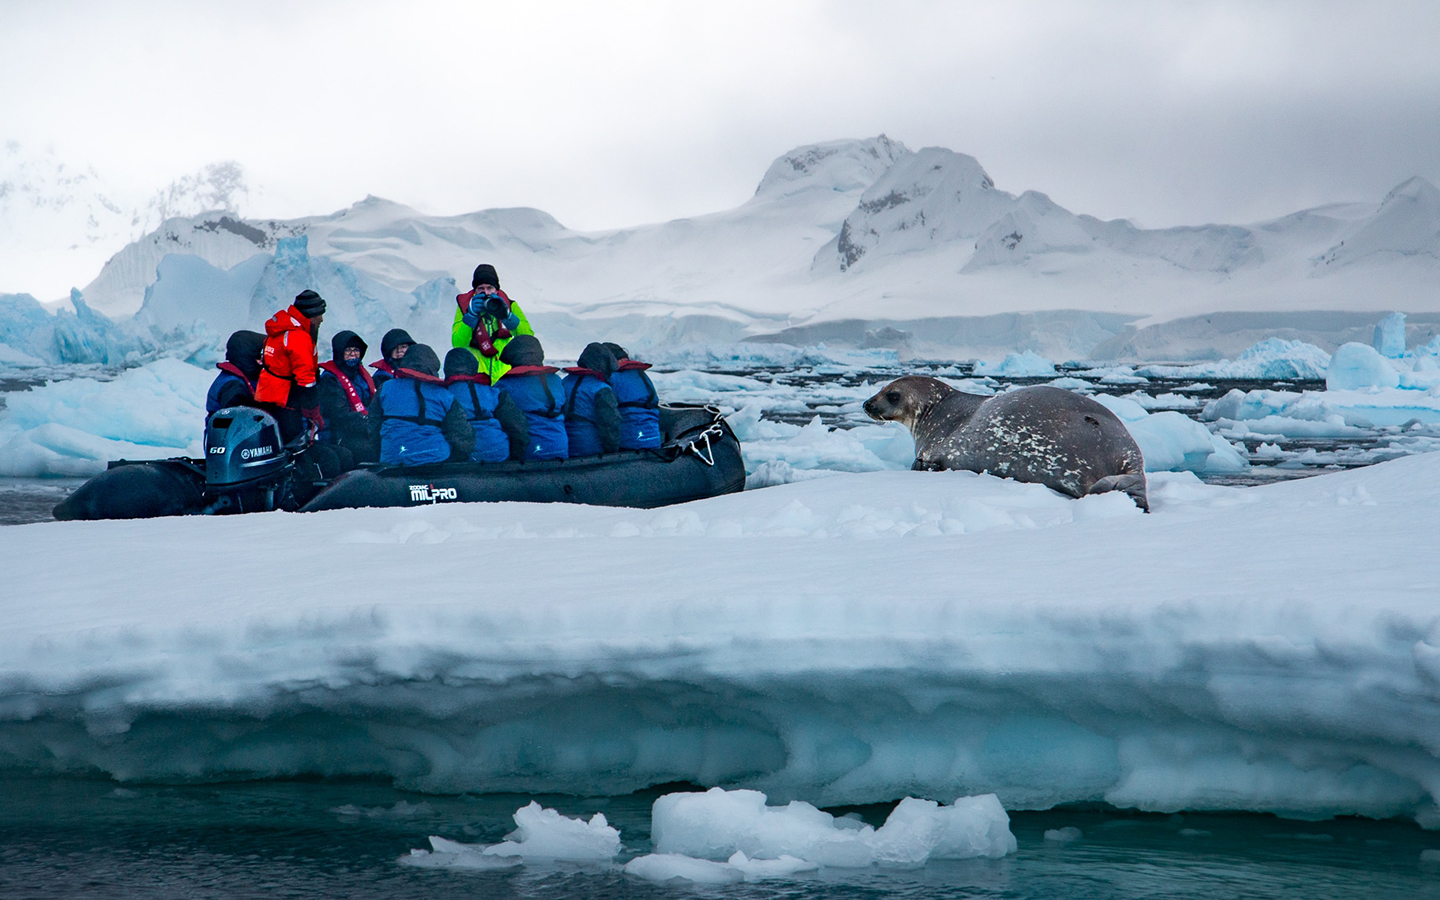 A seal laying down on Antarctic ice seen beside a zodiac filled with travelers taking a photo of it.